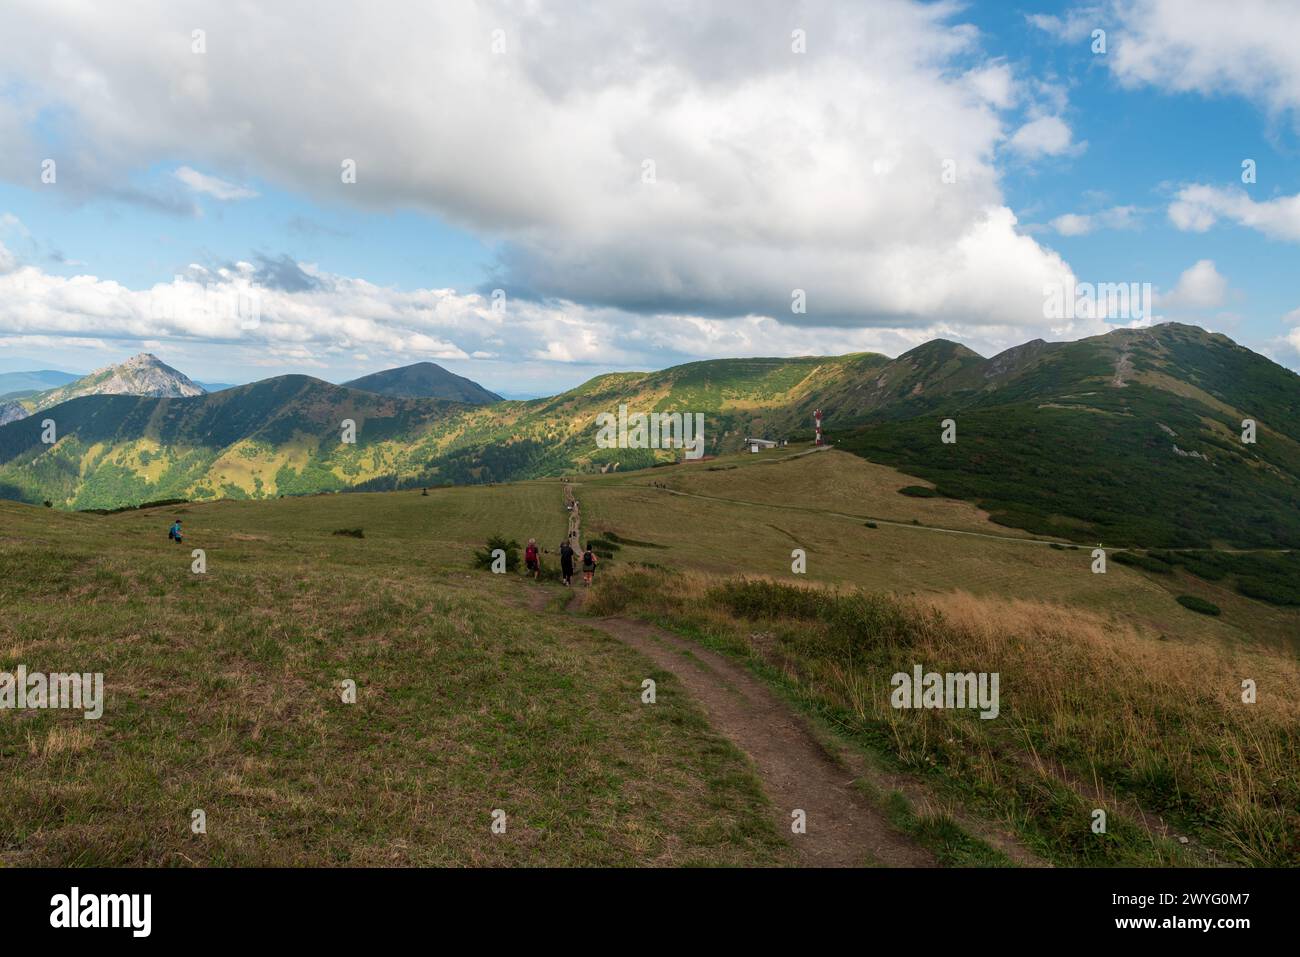 Mala Fatra mountains in Slovakia - view above Snilovske sedlo during late summer afternoon Stock Photo